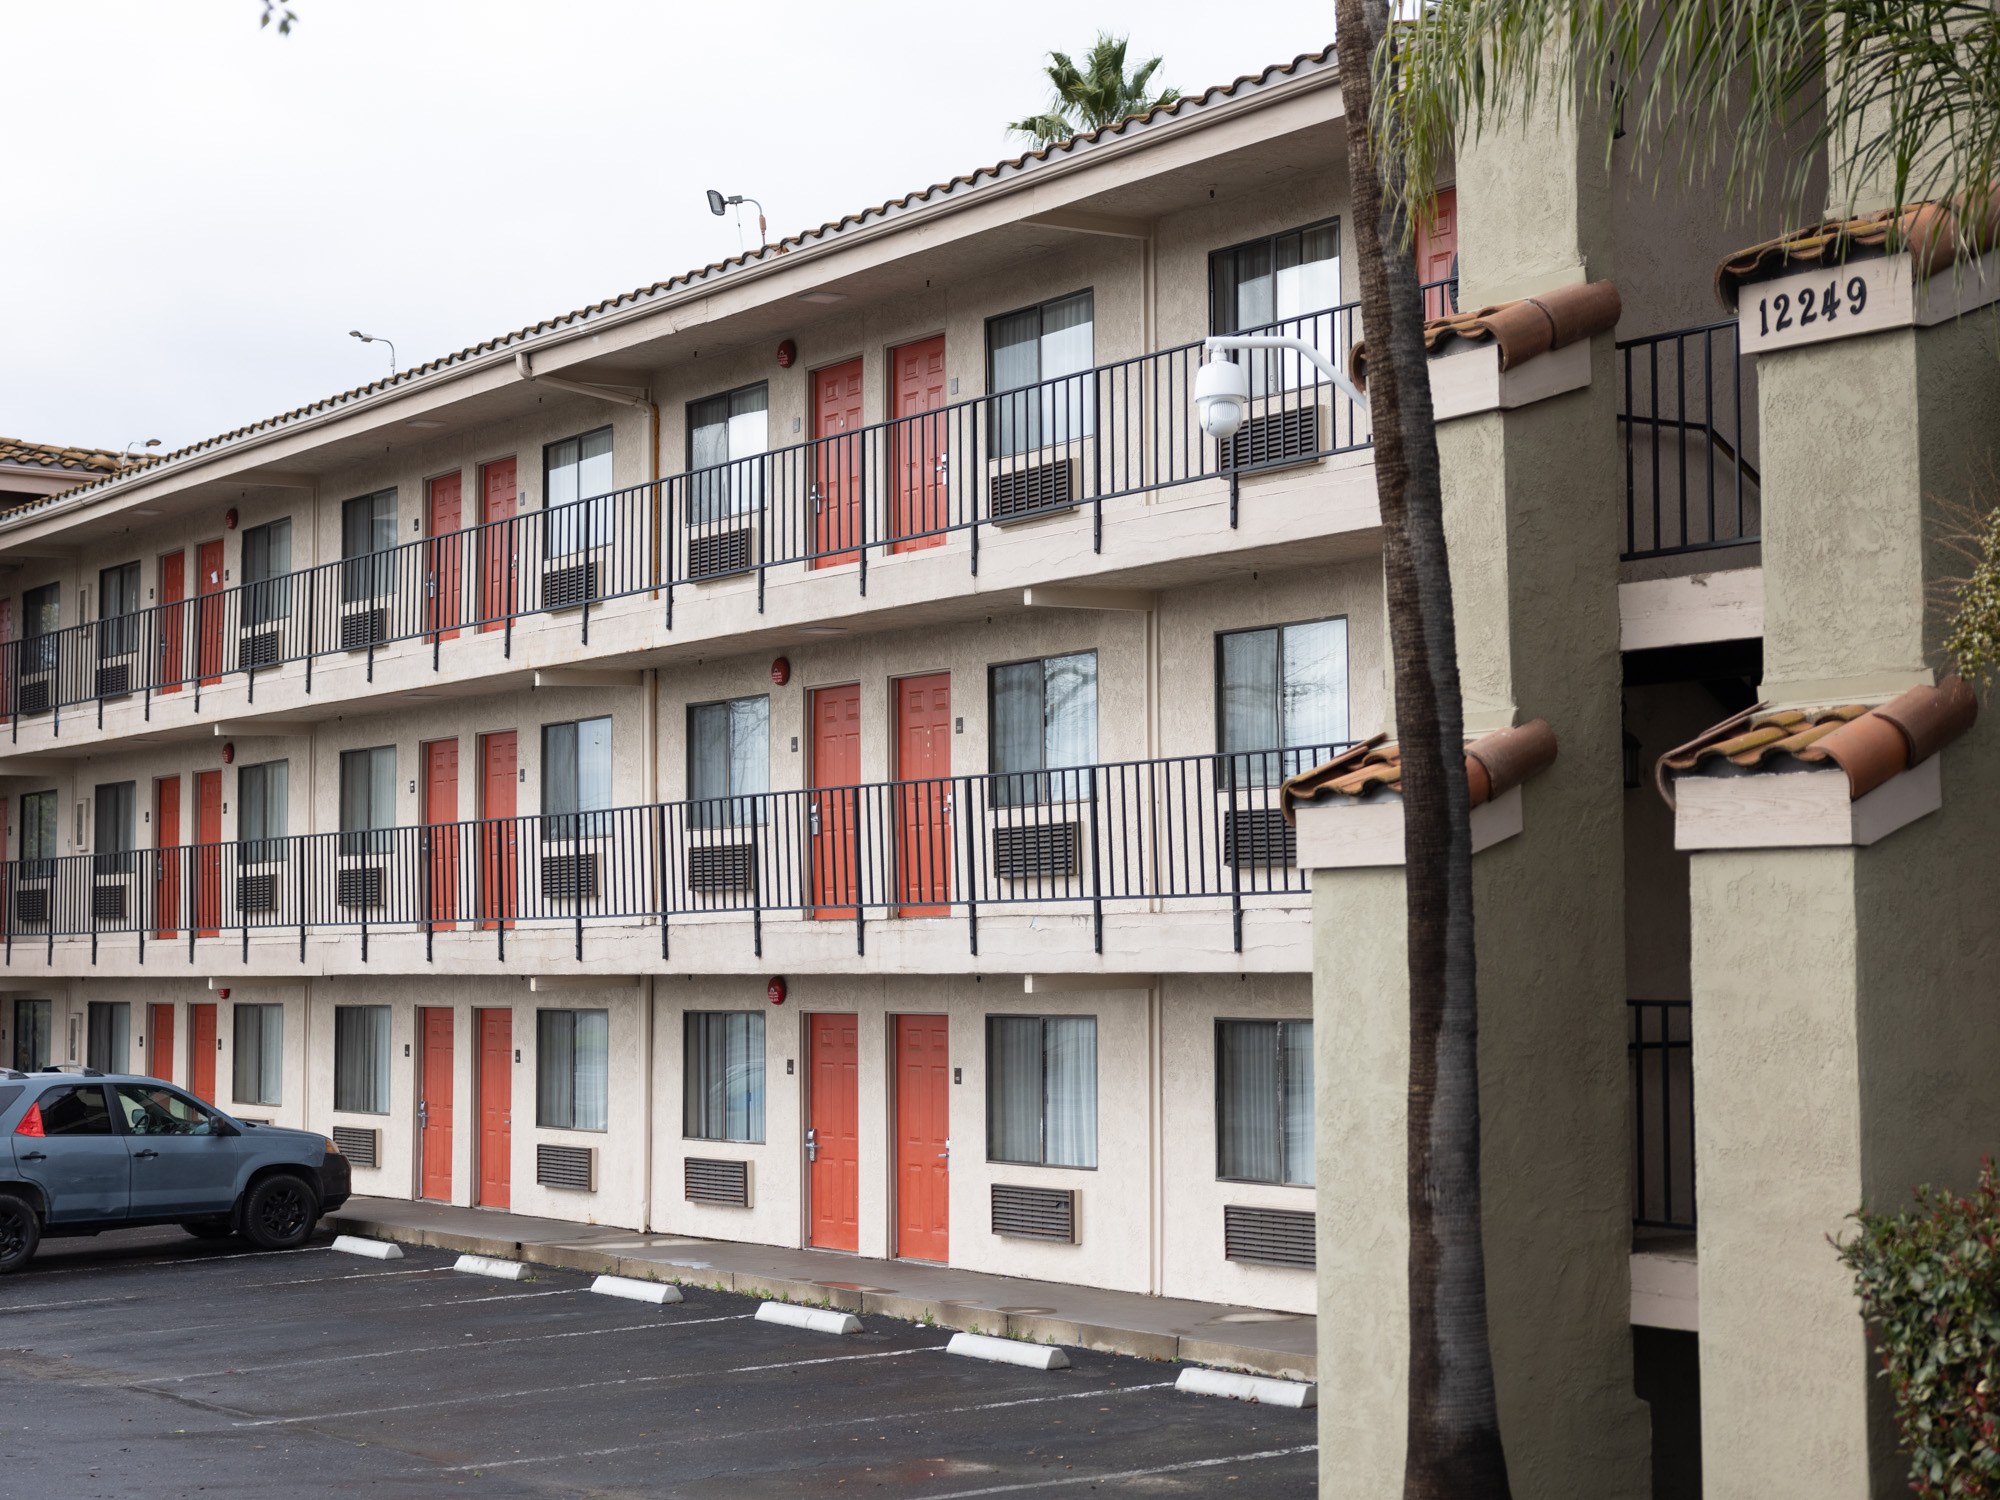 Project Roomkey motels extended for homeless residents 50 years in local news Major holidays this time of year picture